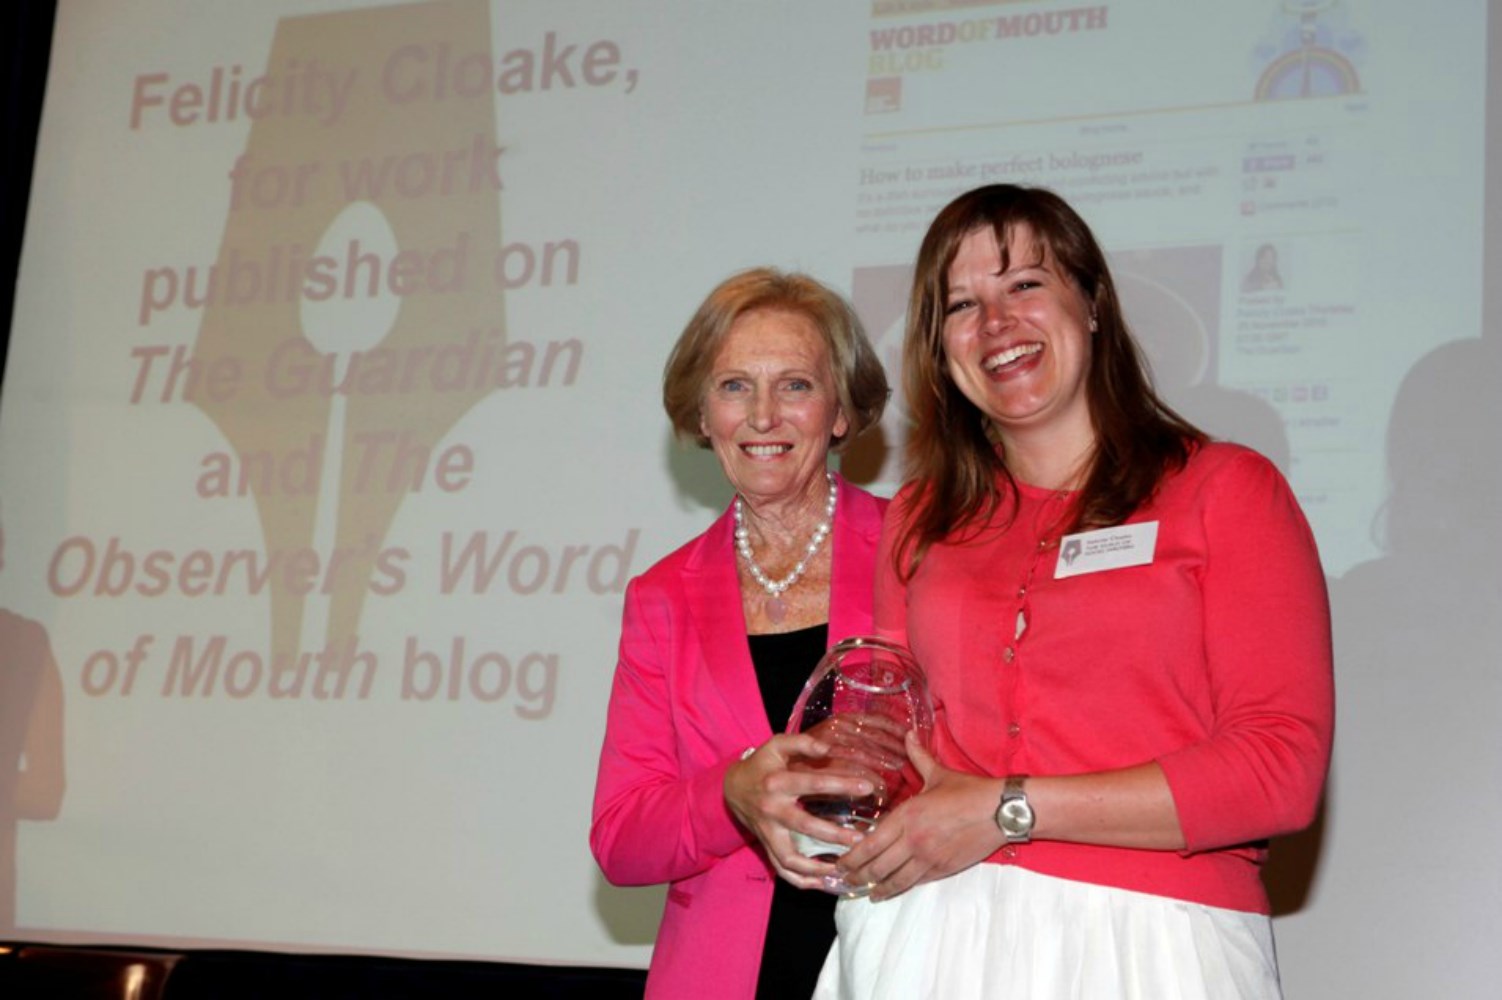 Felicity Cloake (right) receiving one of her two awards from Mary Berry